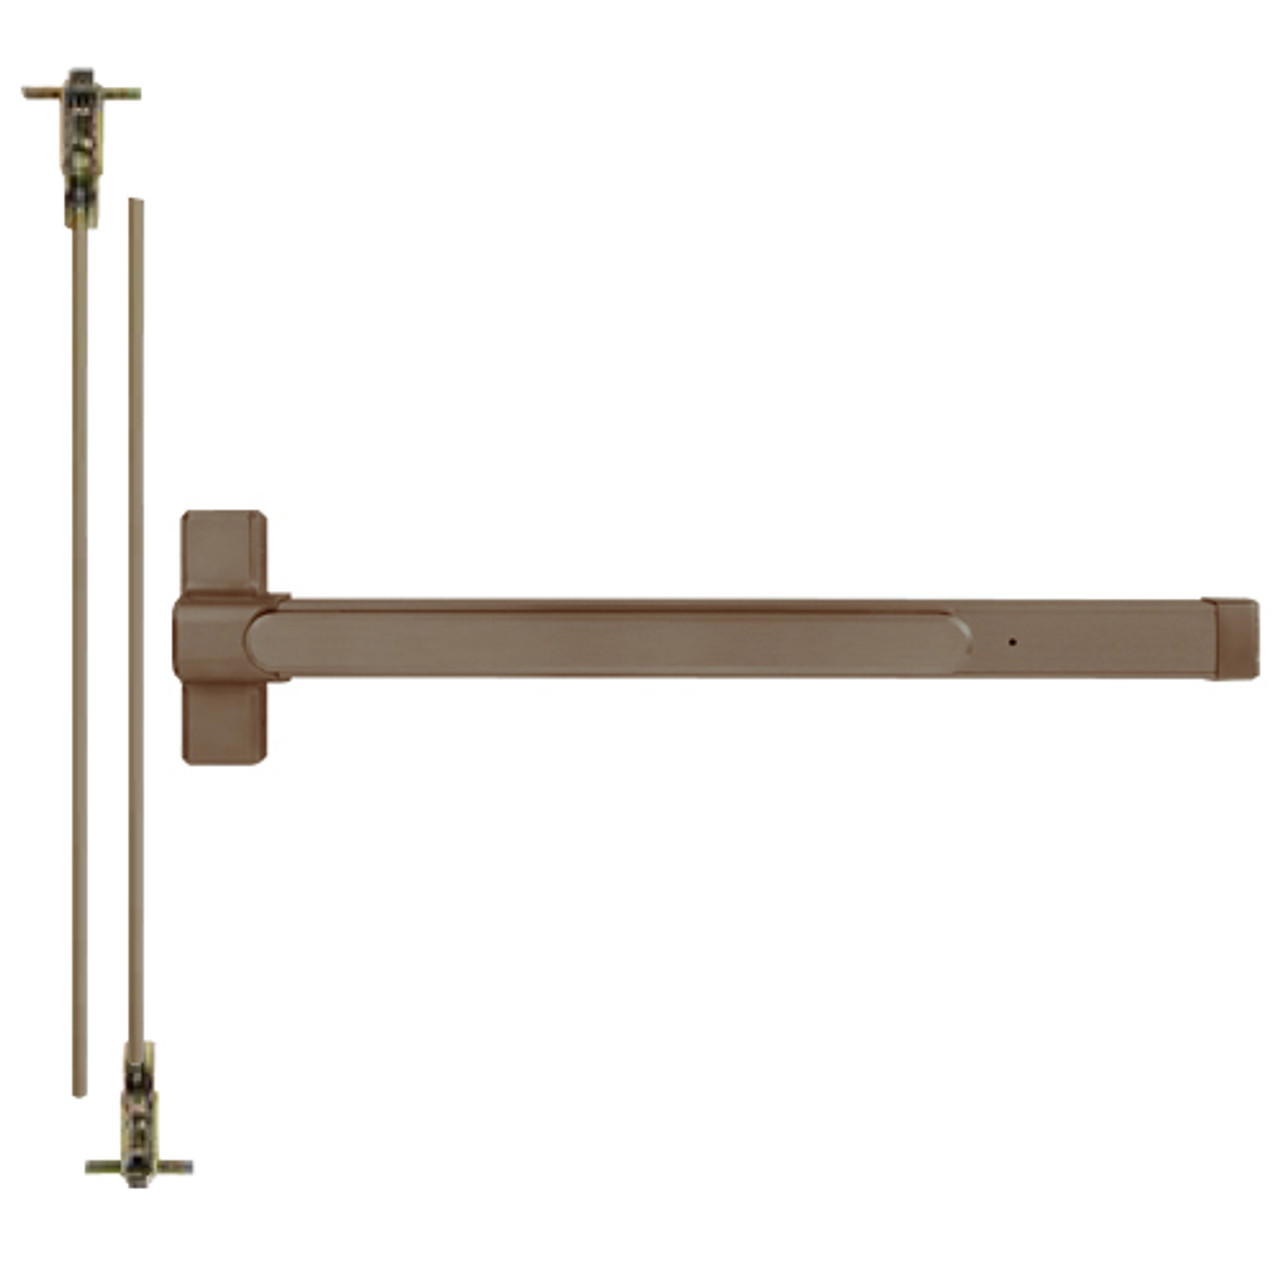 QED125-36-8-313AN-LC Stanley QED100 Series Heavy Duty Concealed Vertical Rod Cylinder Dog Exit Device in Anodized Duranodic Bronze Finish